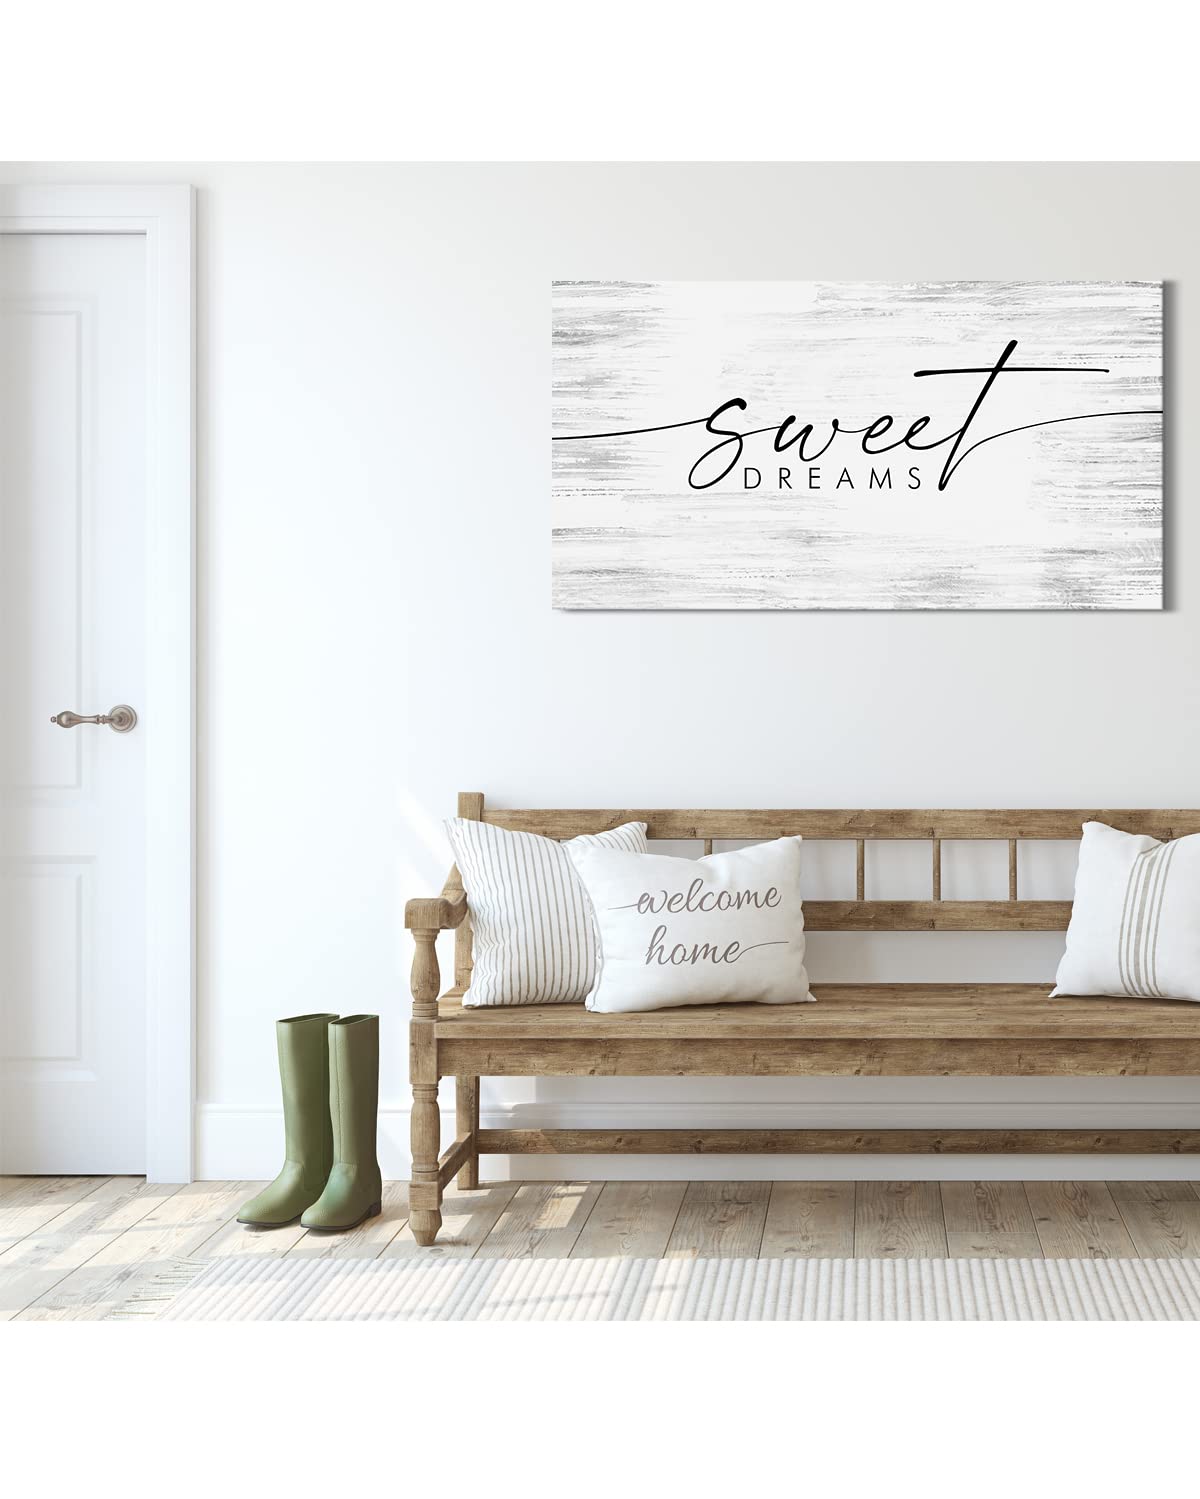 Above Bed Wall Decor for Bedroom - Sweet Dreams Master Bedroom Wall Art - Minimalist Farmhouse Decor - Wedding Gift for Couple - Bridal Shower Gift